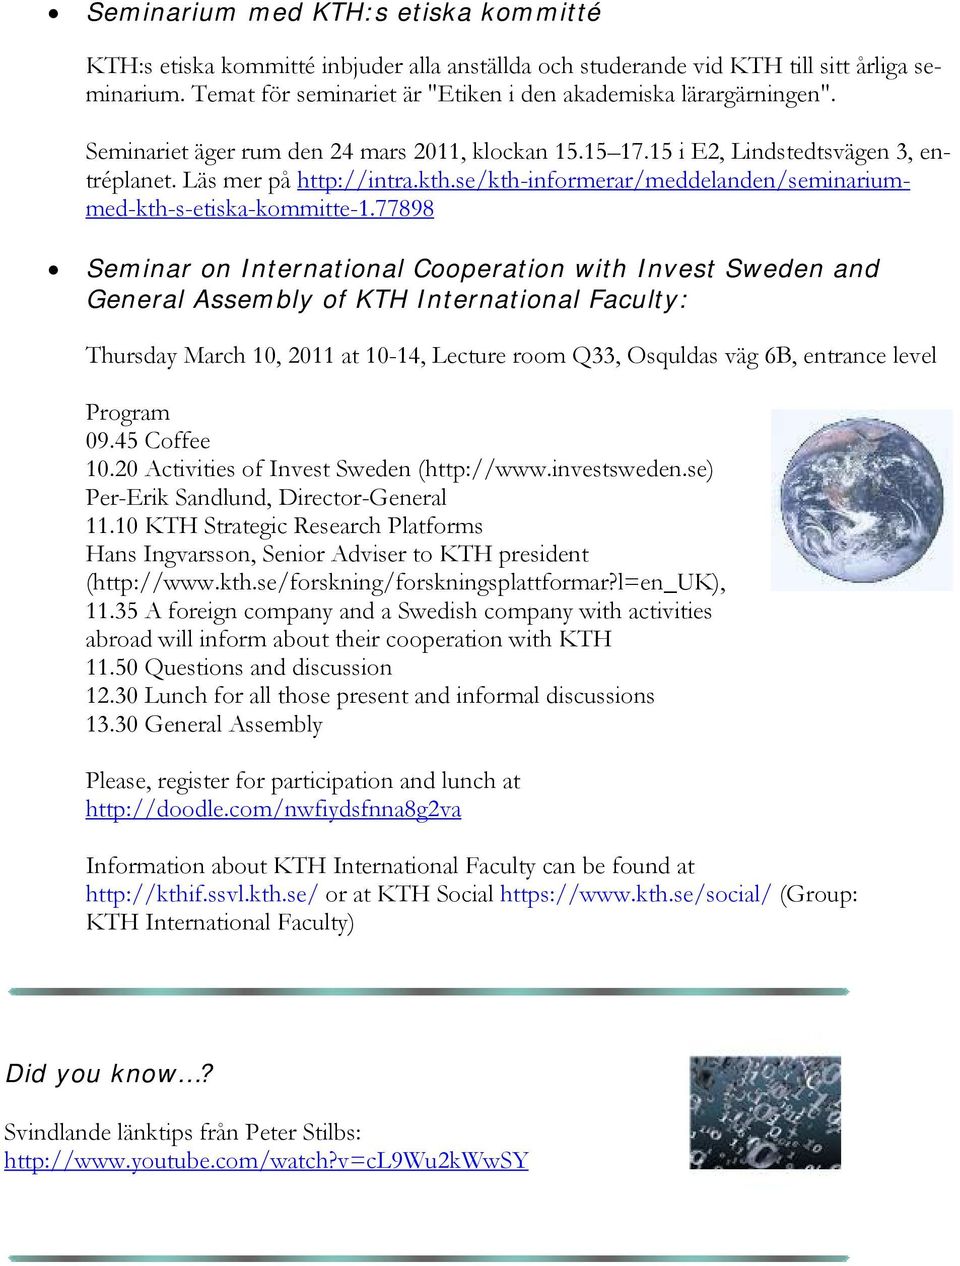 77898 Seminar on International Cooperation with Invest Sweden and General Assembly of KTH International Faculty: Thursday March 10, 2011 at 10-14, Lecture room Q33, Osquldas väg 6B, entrance level